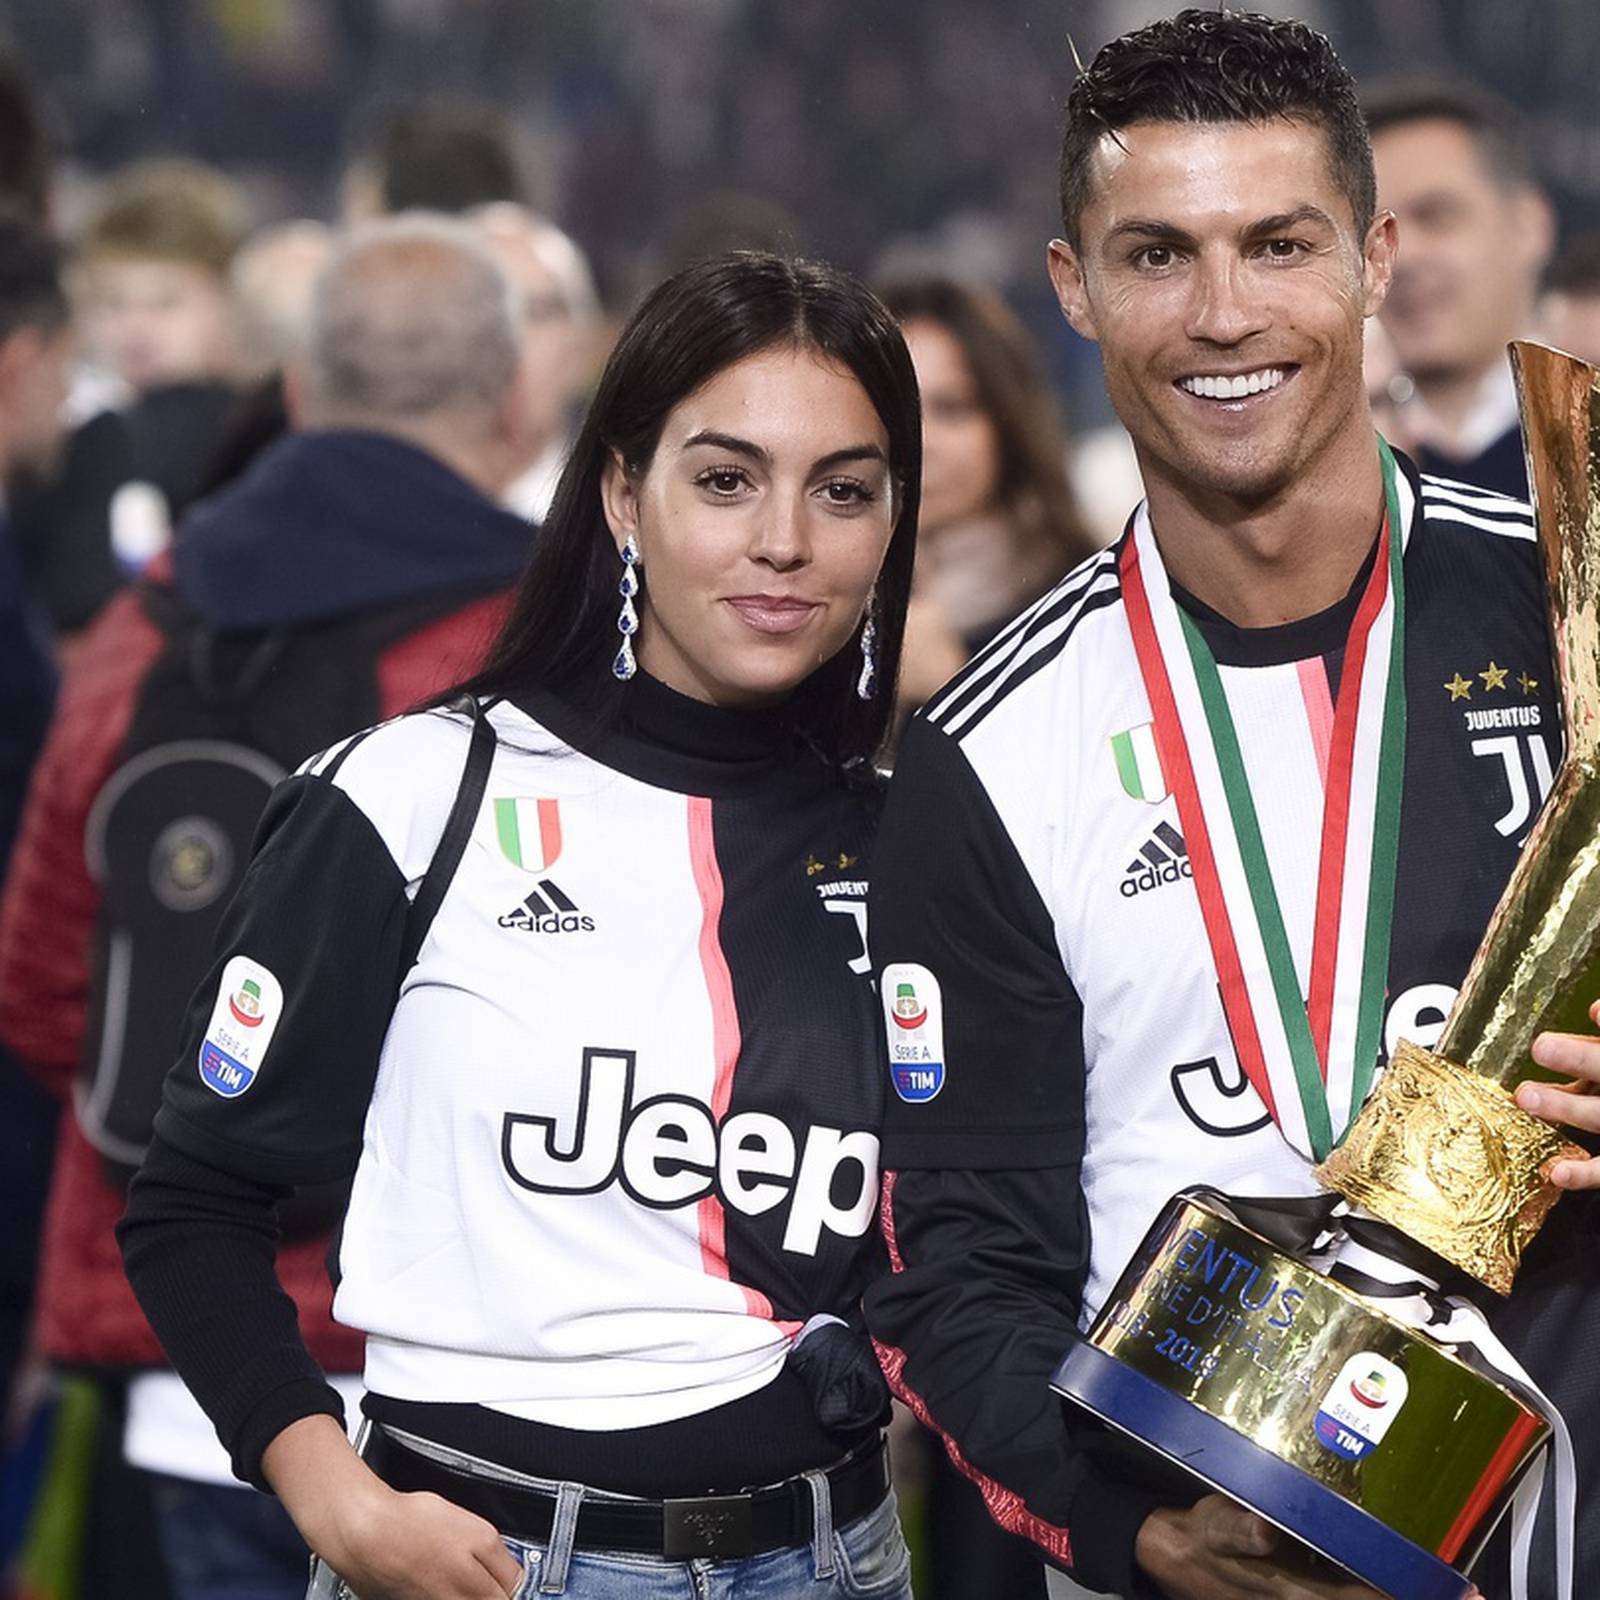 Juventus FC Stock Has Doubled in the Cristiano Ronaldo Era, and